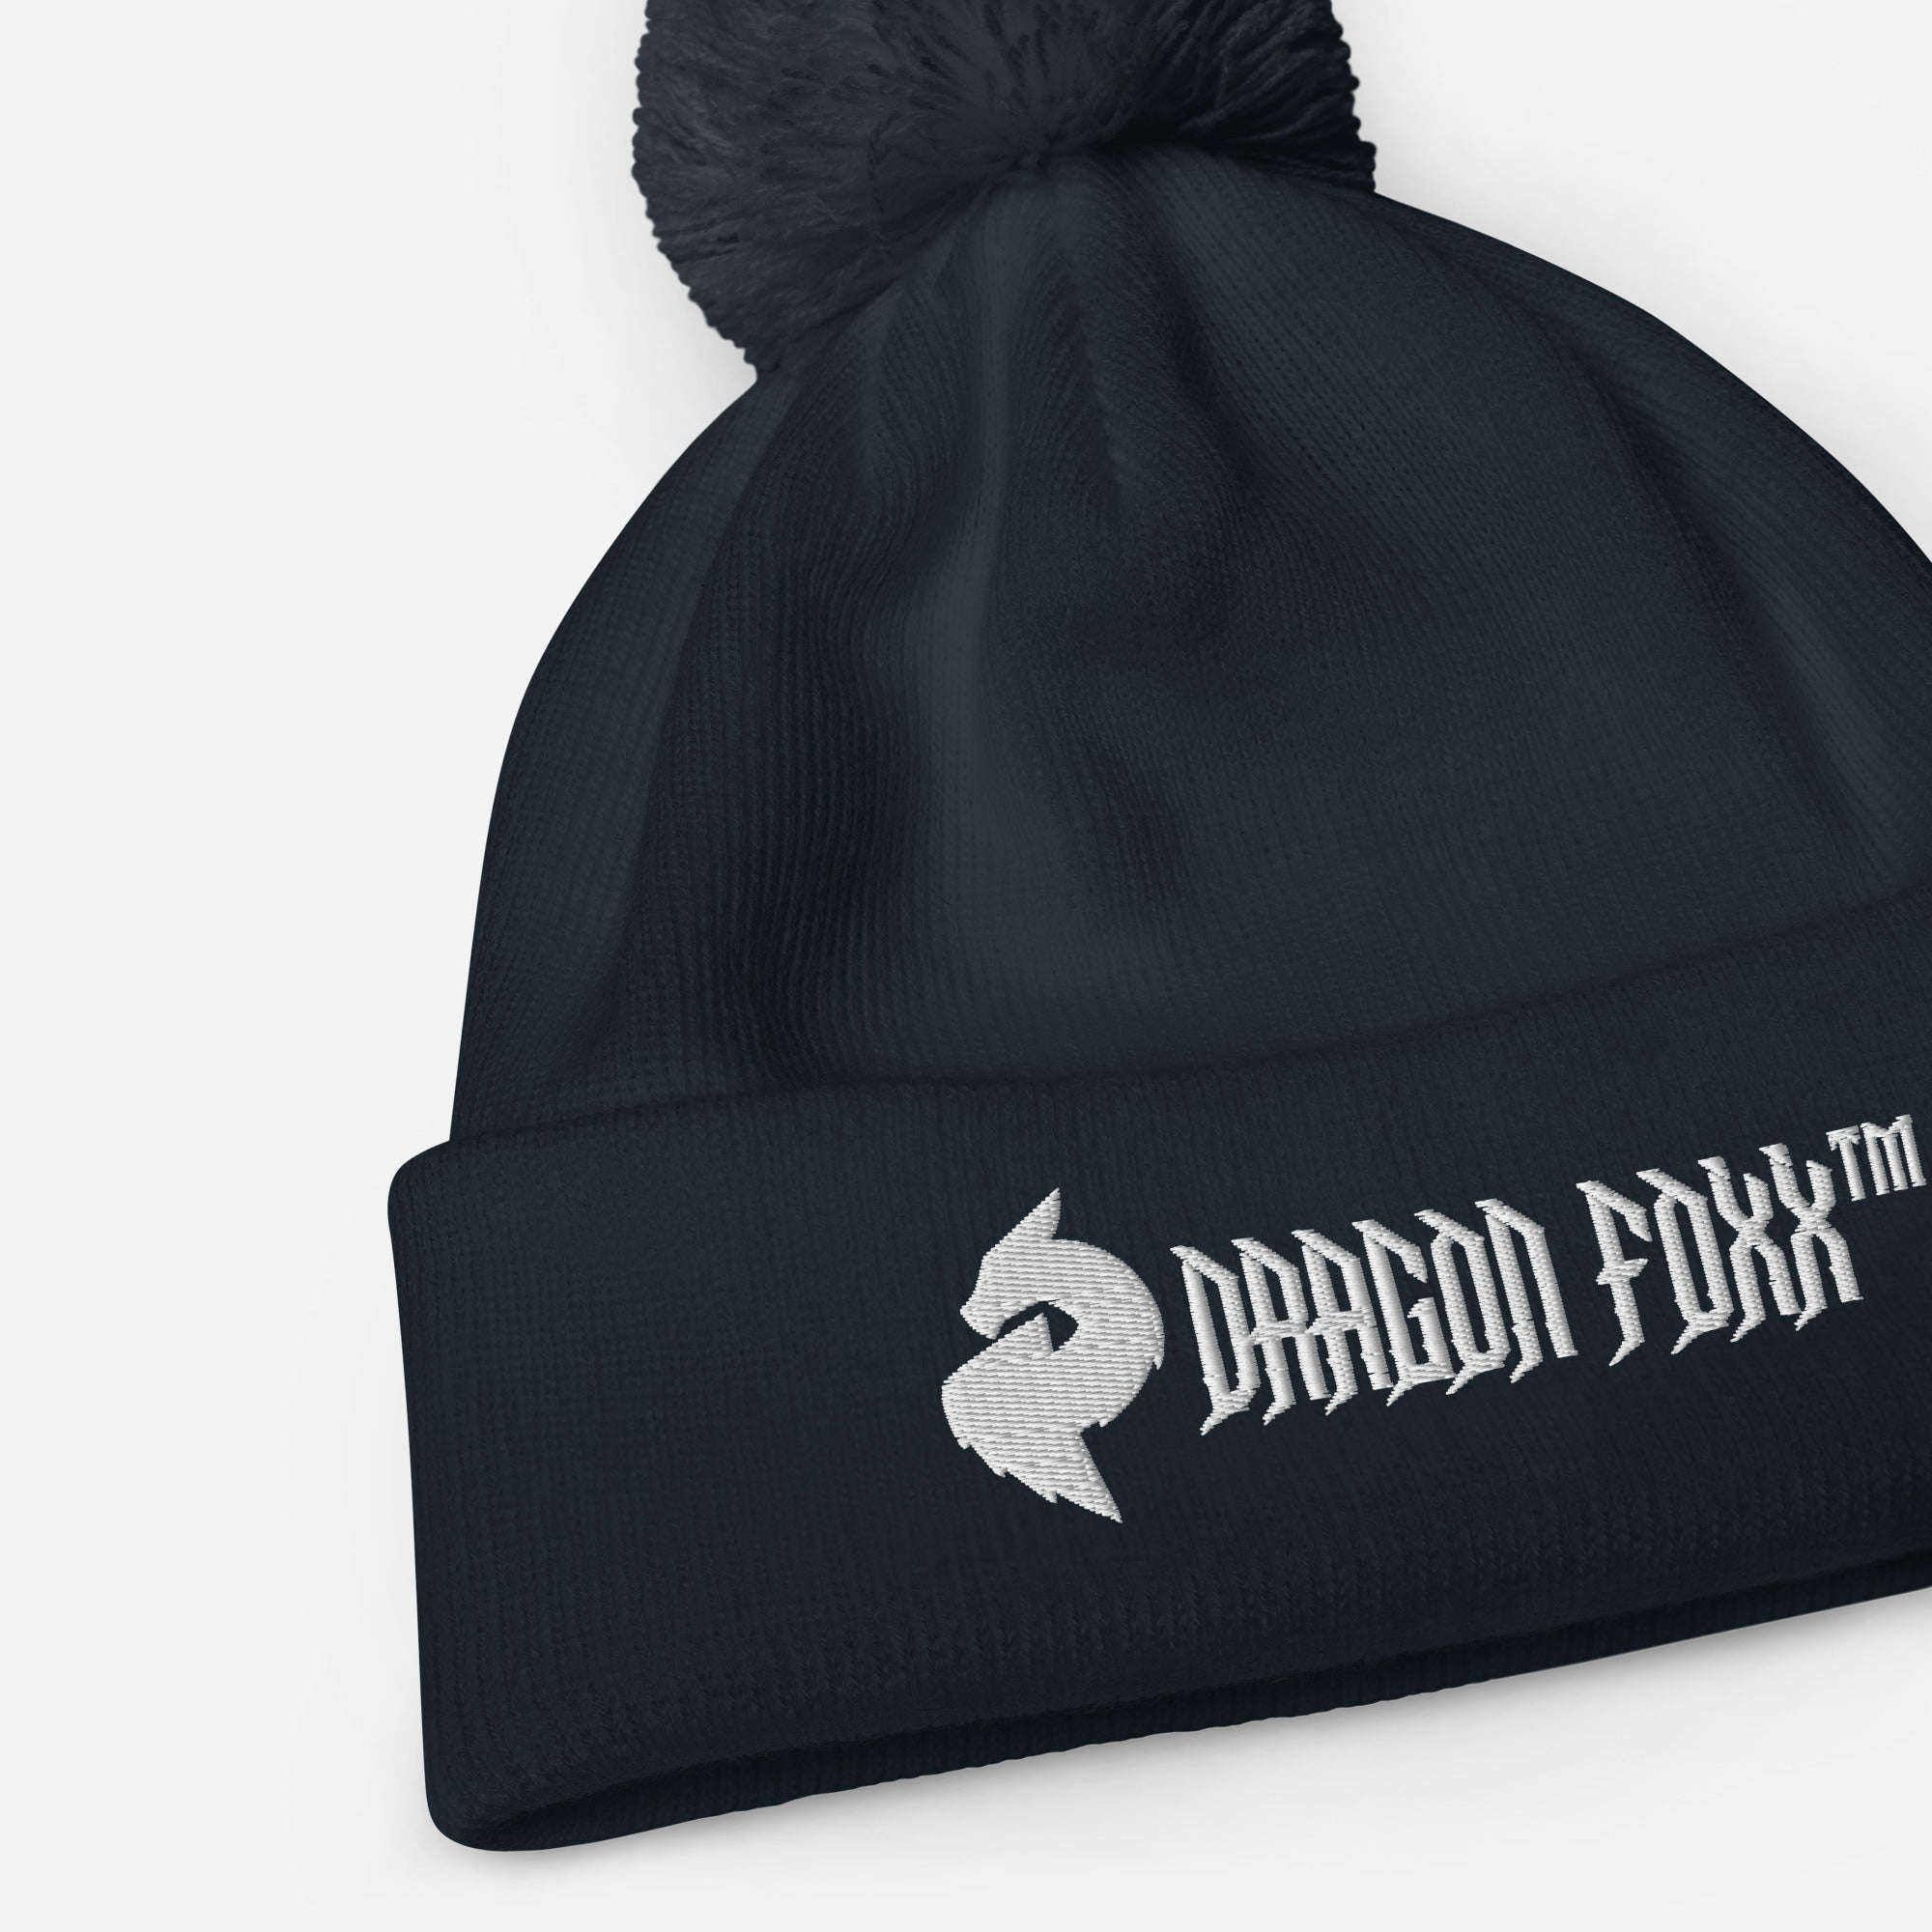 His or Hers Dragon Foxx™ Pom pom beanie in 6 Colors - His or Hers Dragon Foxx™ Pom pom beanie - DRAGON FOXX™ - His or Hers Dragon Foxx™ Pom pom beanie in 6 Colors - 8560034_11736 - French Navy - - Accessories - Beanie - Beanies